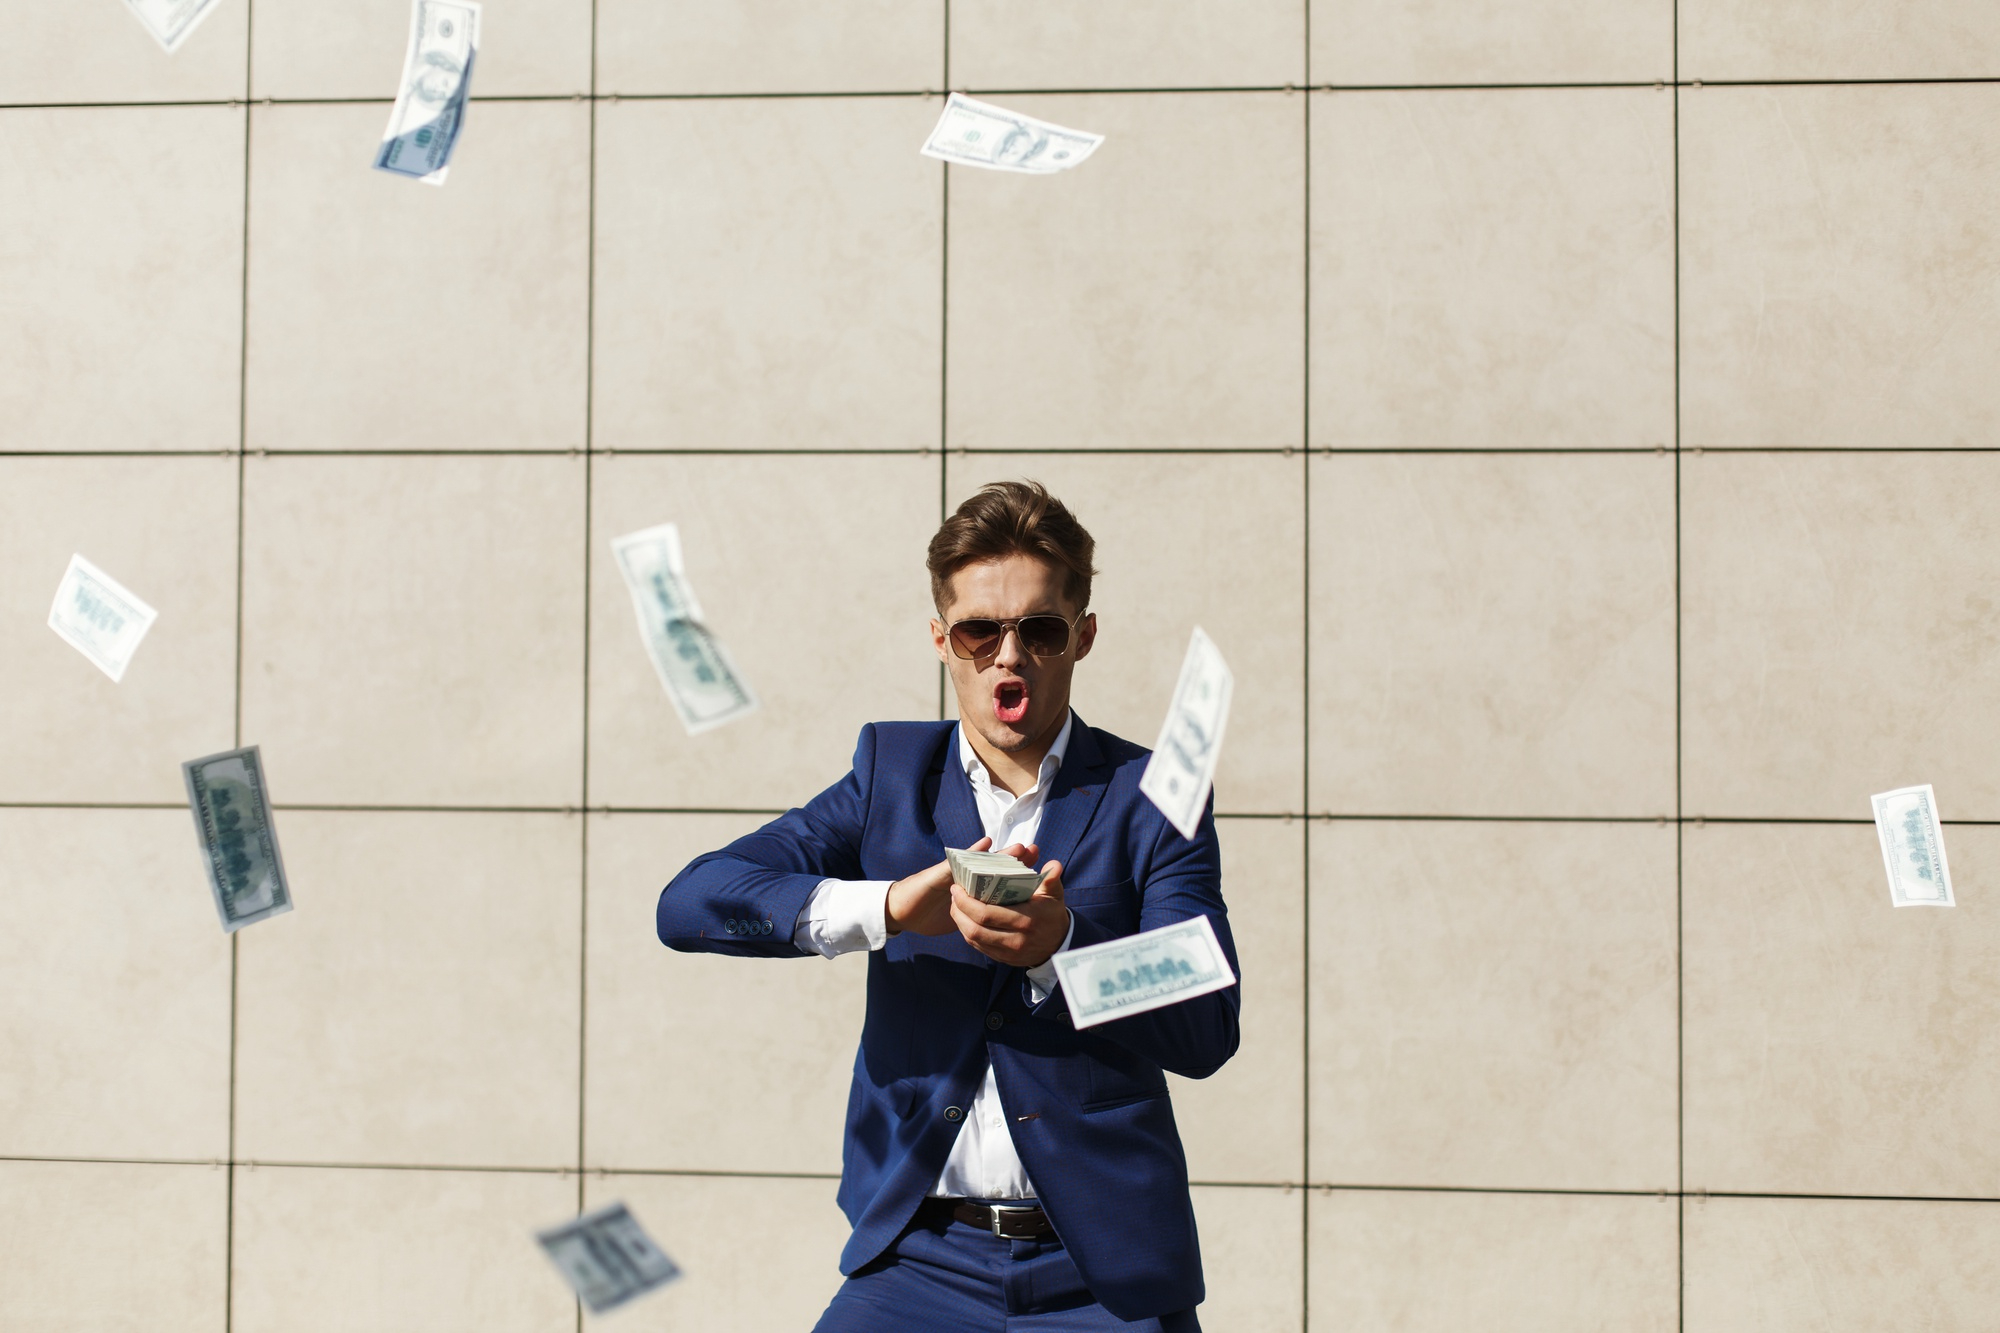 A man wearing sunglasses and a suit while throwing money around in the street | Source: Freepik